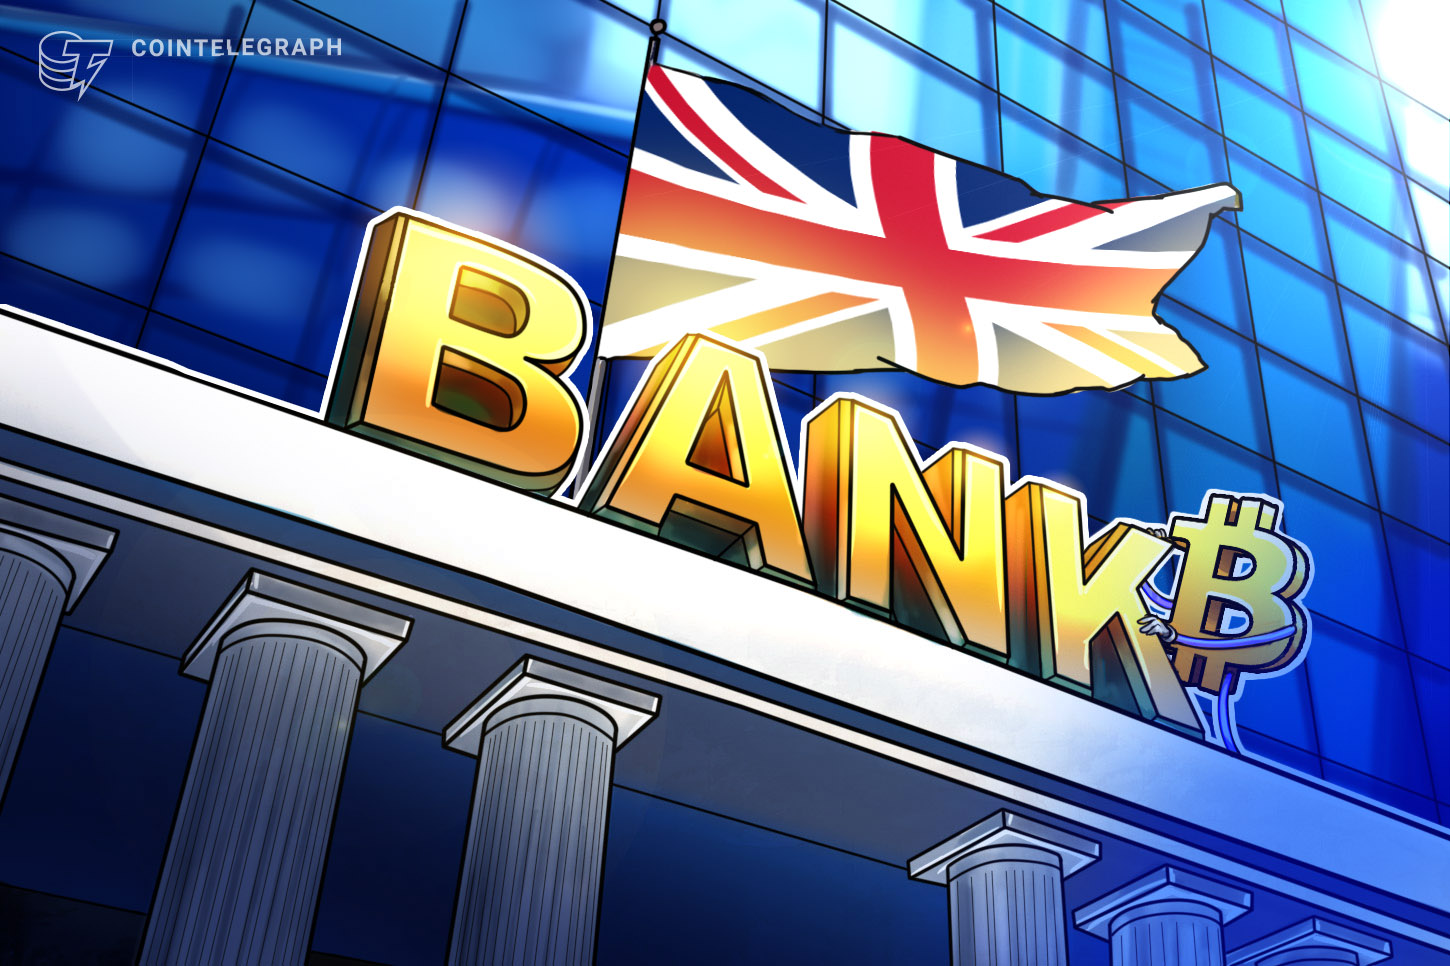 BoE governor continues to claim Bitcoin has ‘little intrinsic worth’